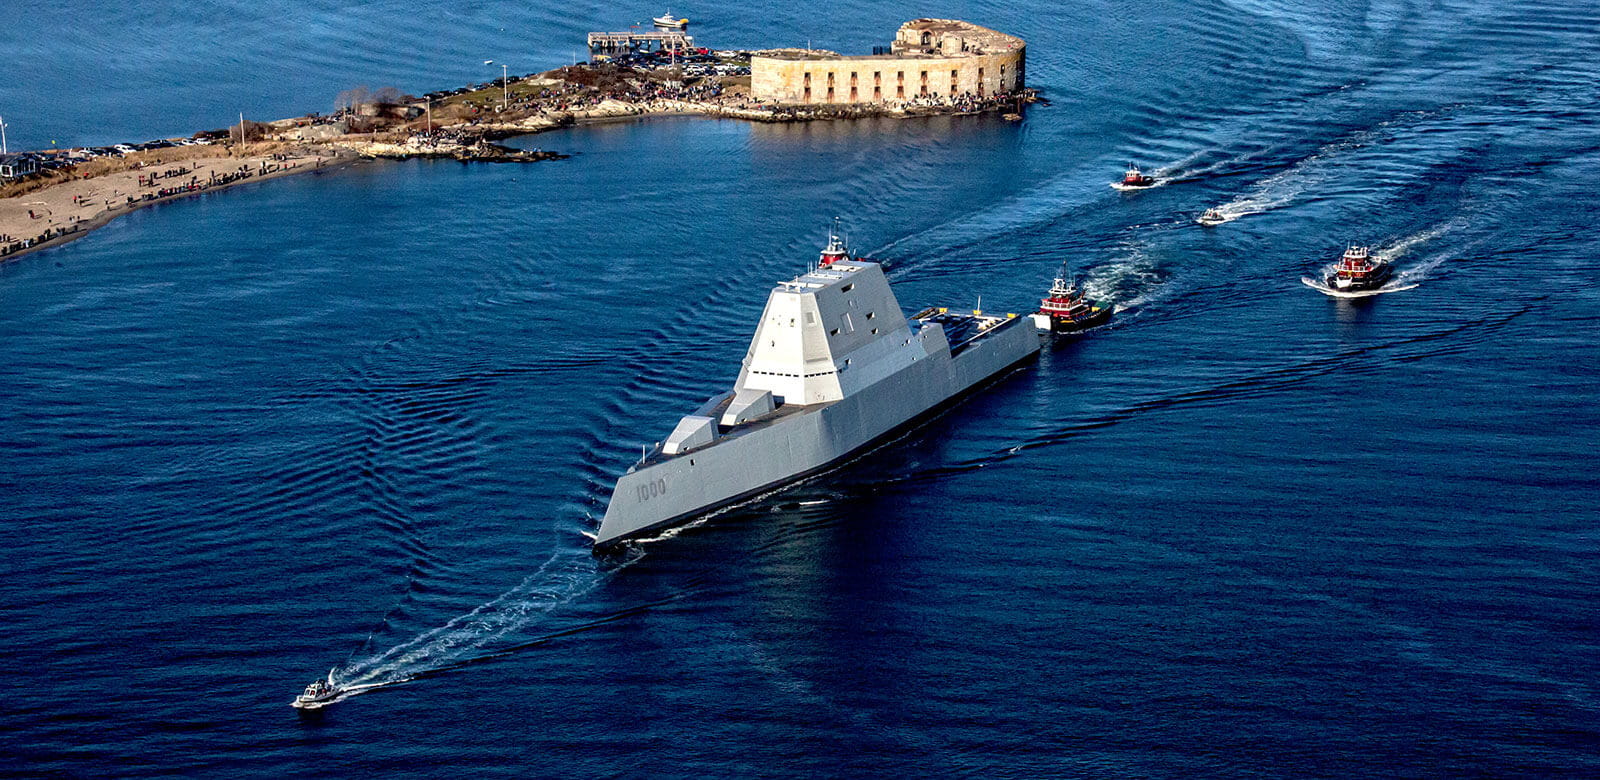 Zumwalt destoyer being guided by tugboats